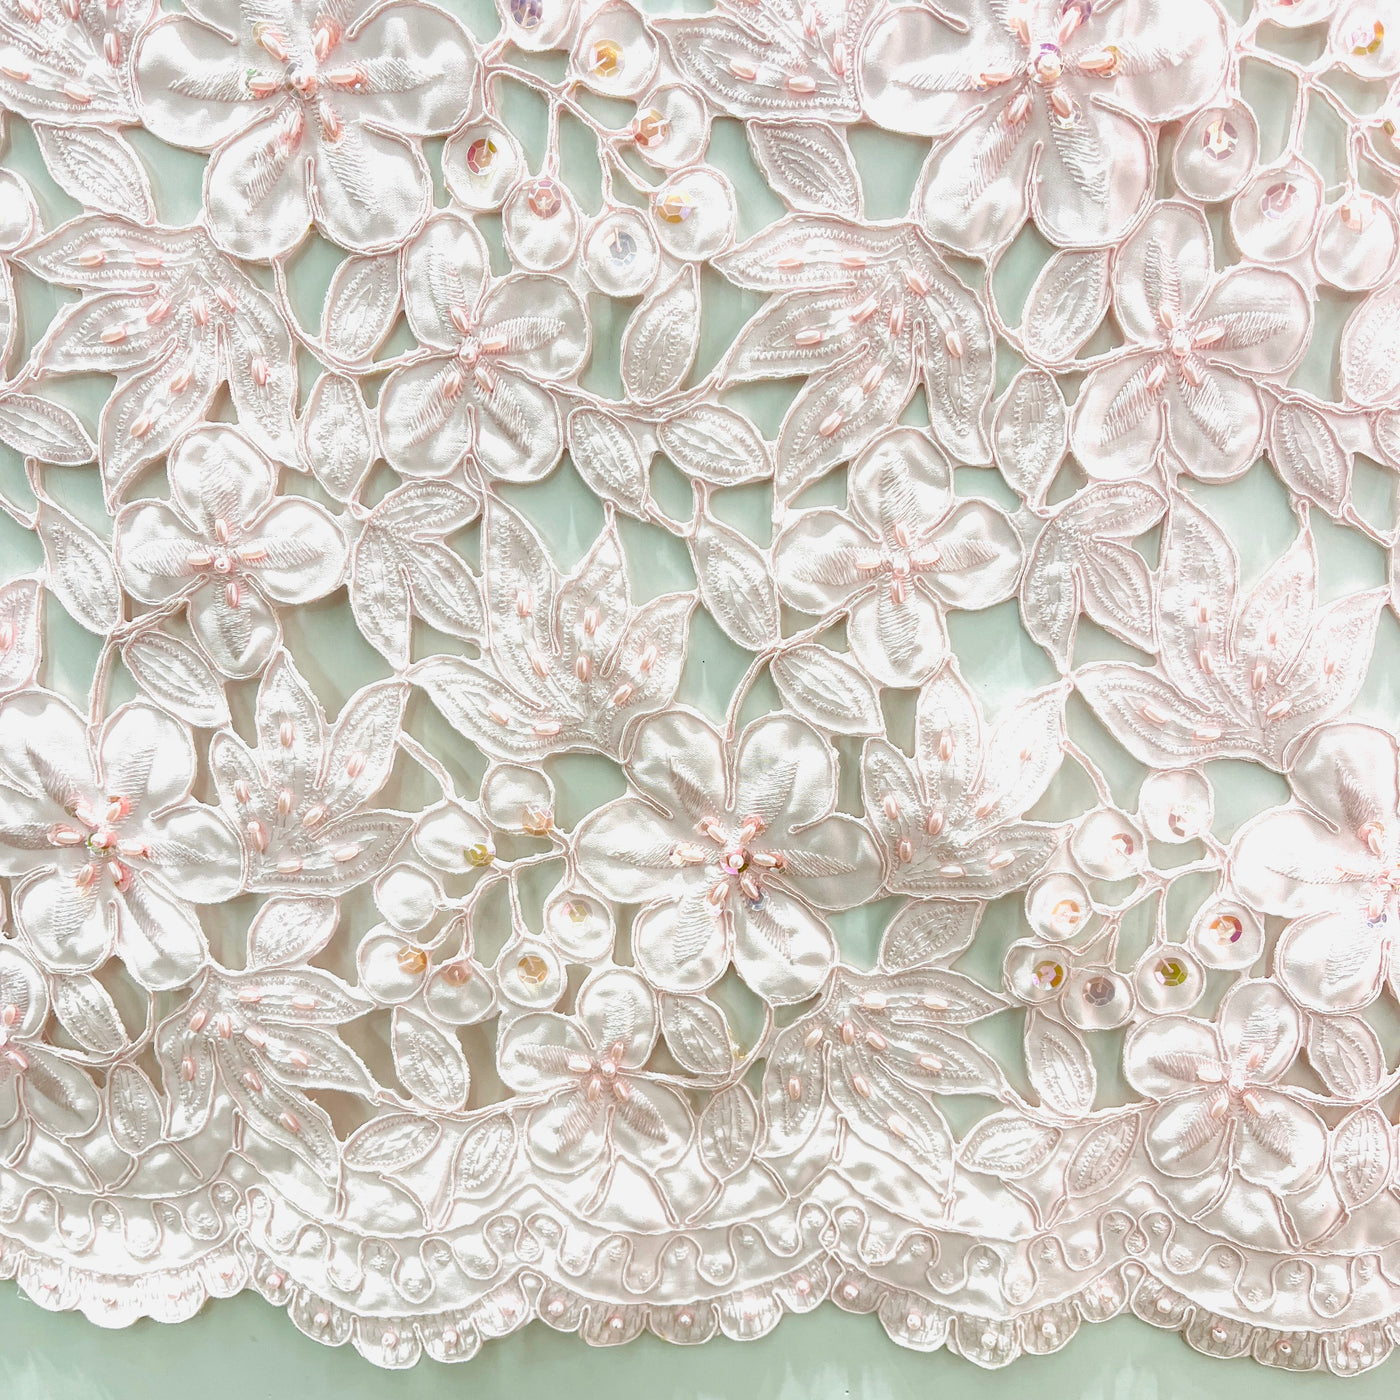 Corded Bridal Lace Fabric Embroidered on 100% Polyester Satin | Lace USA